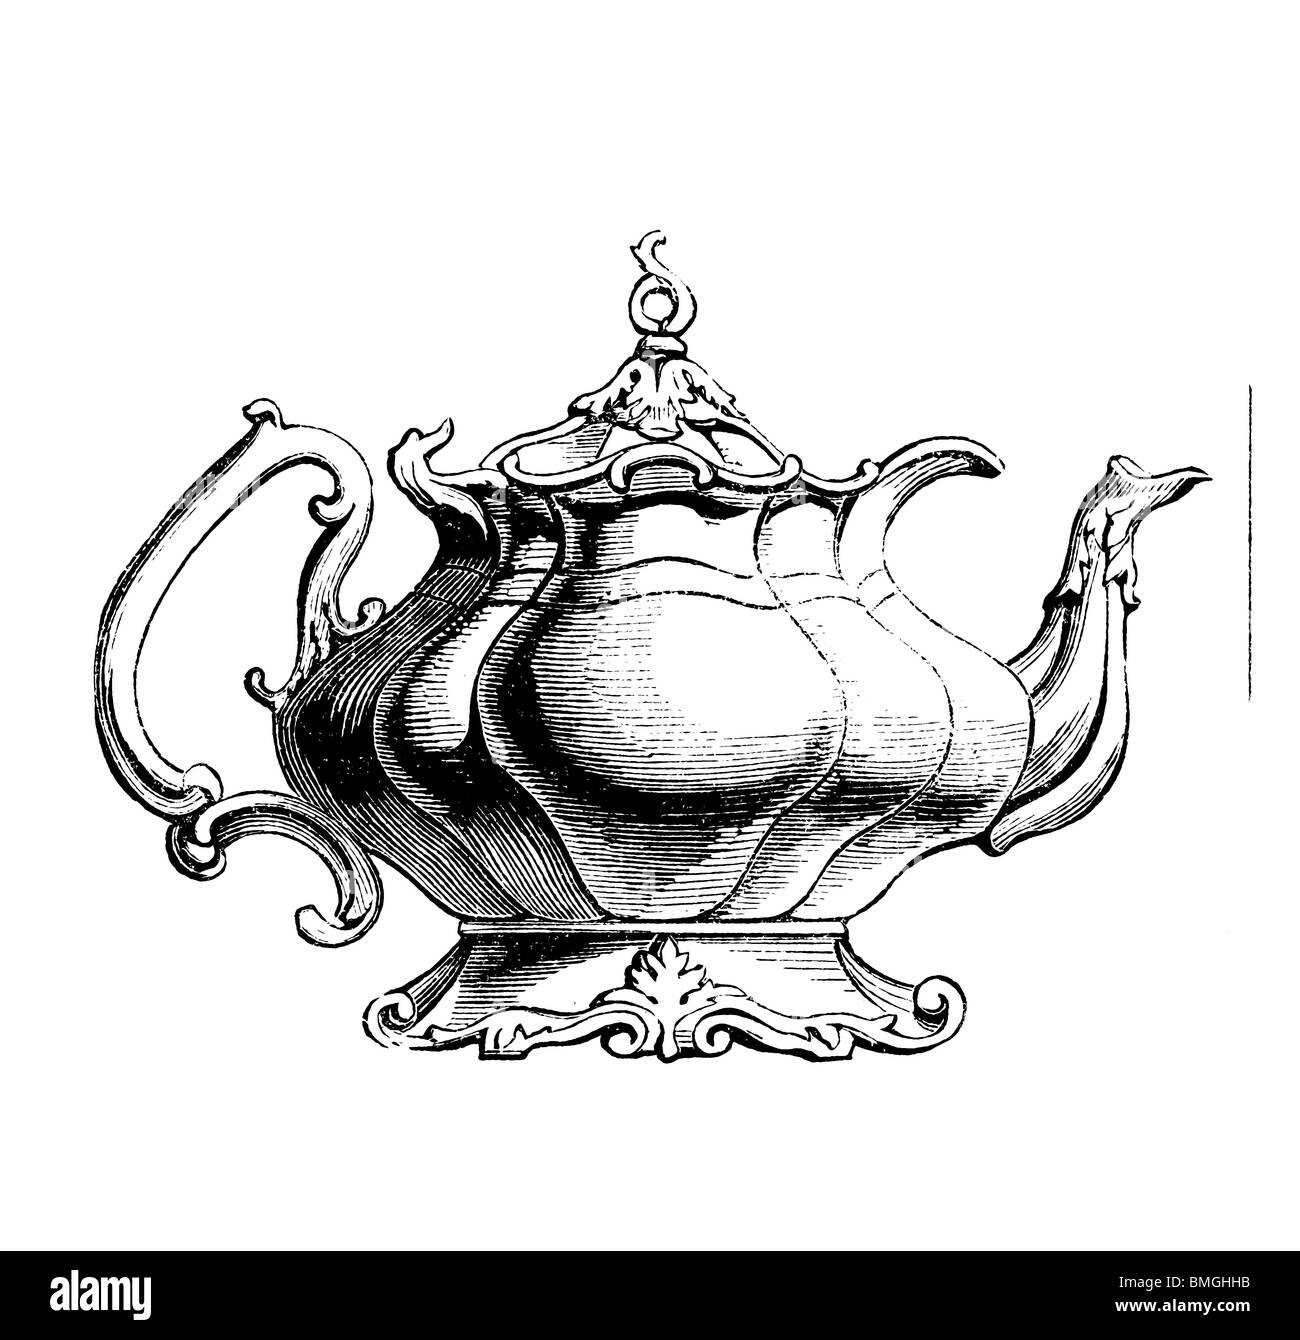 Black and white engraving cut out isolated on white. Illustration of an art item exhibited at the Great London Exhibition 1851. Stock Photo